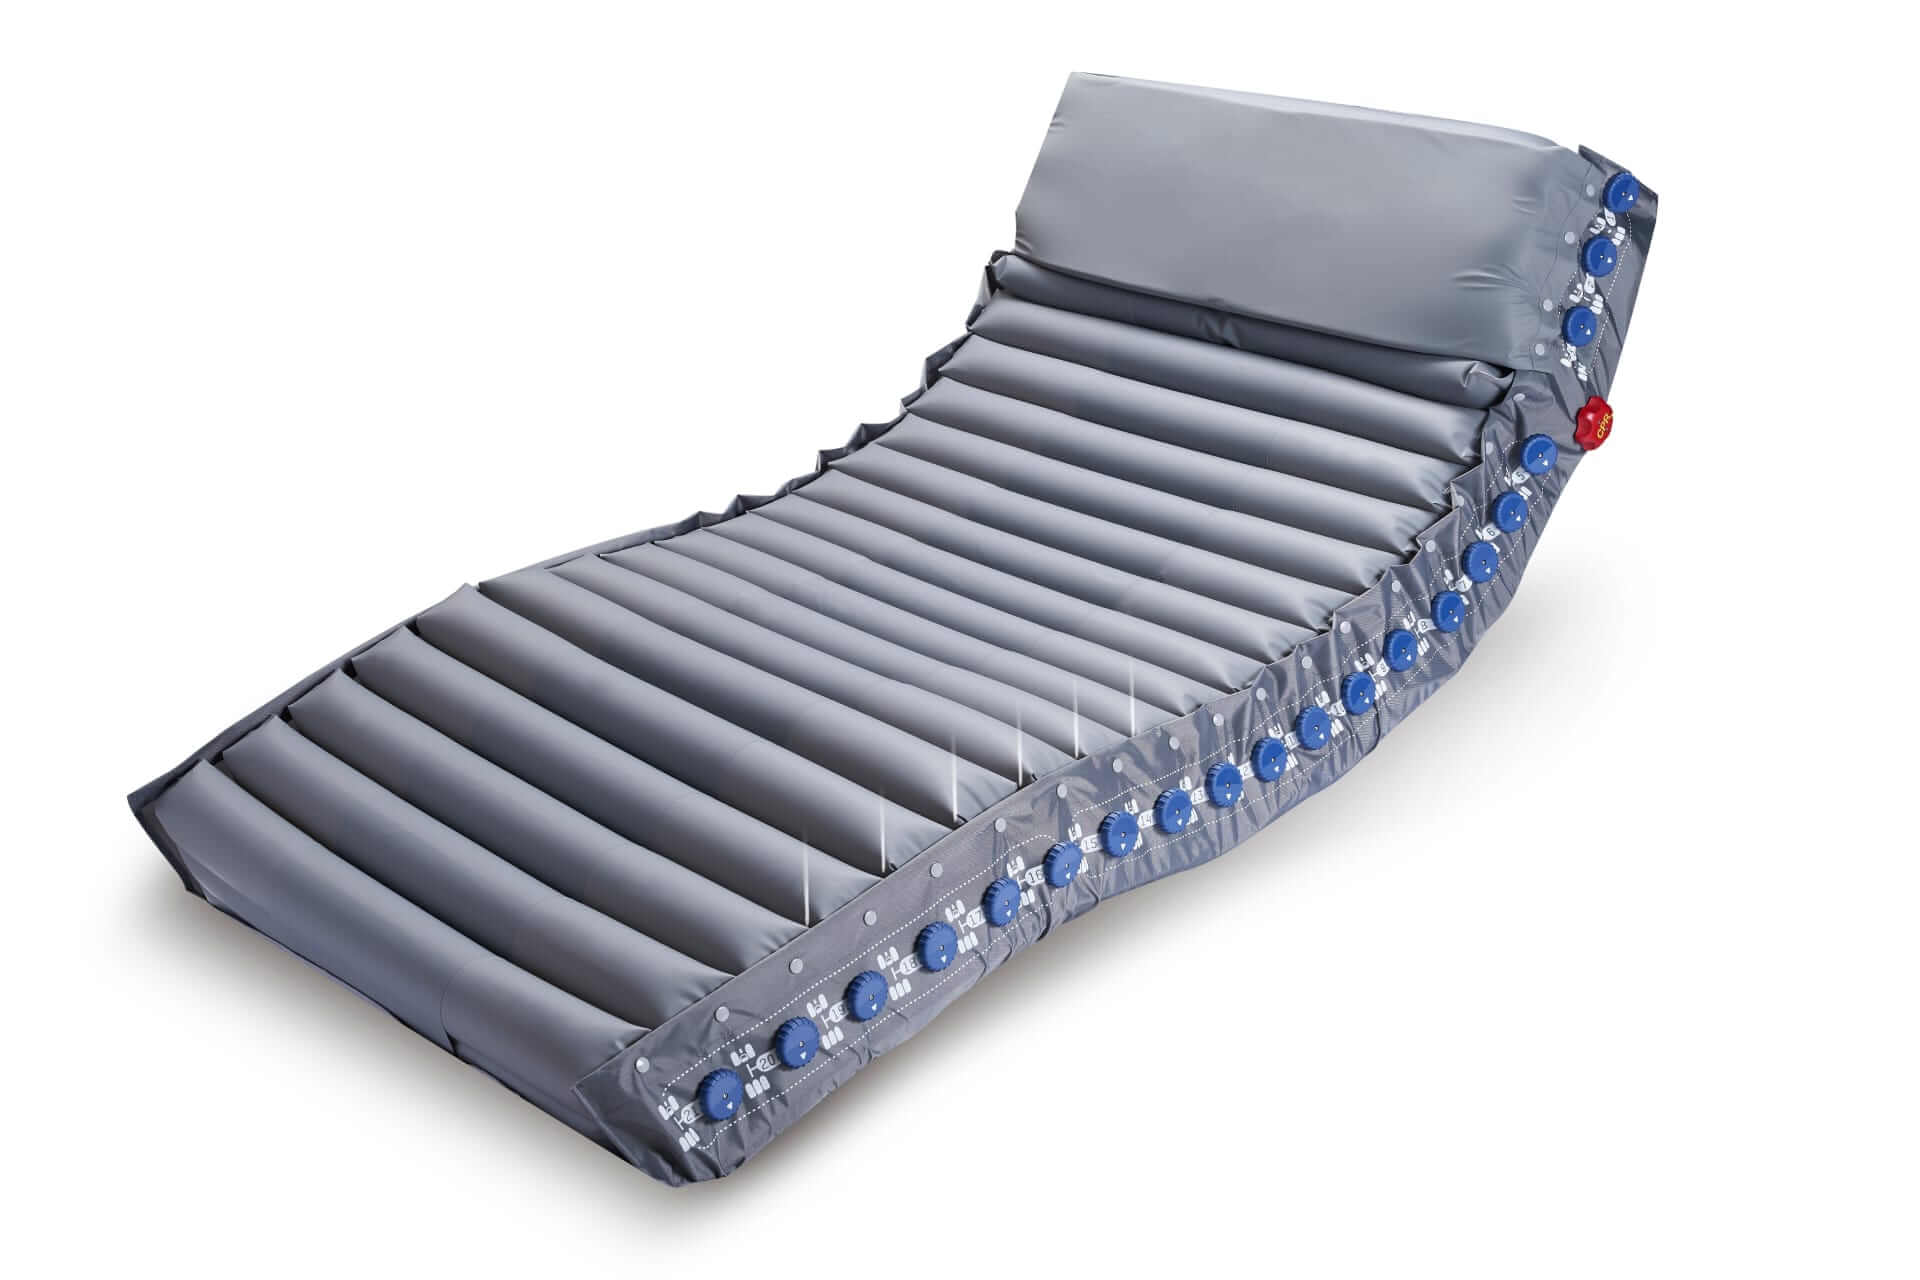 Pro care - Medical bed - Wellell